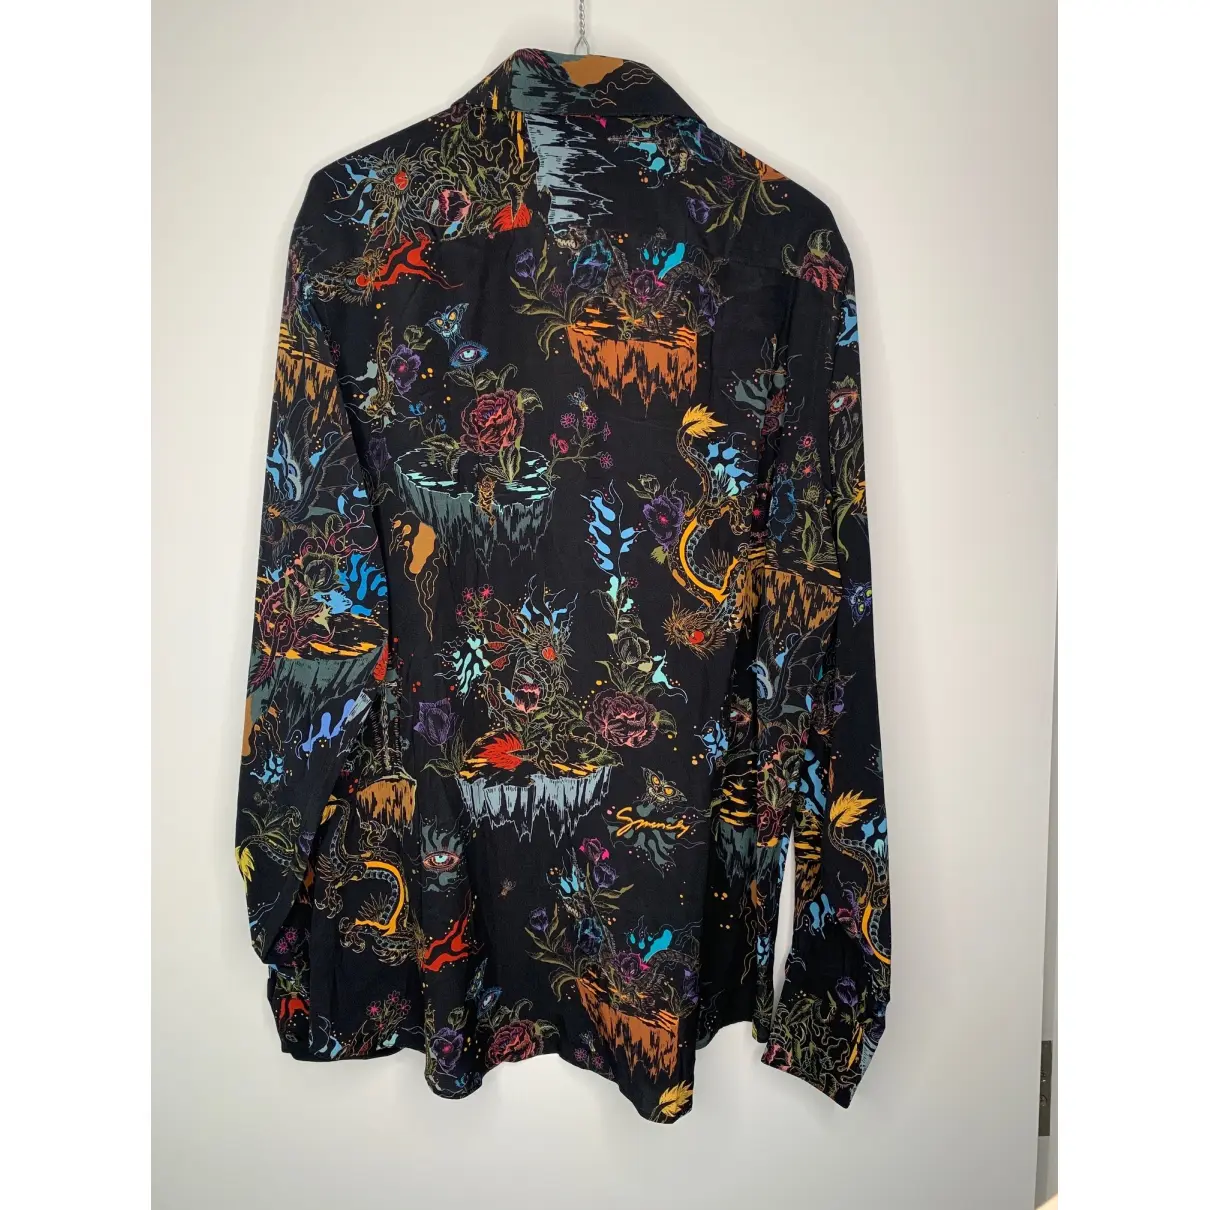 Buy Givenchy Silk shirt online